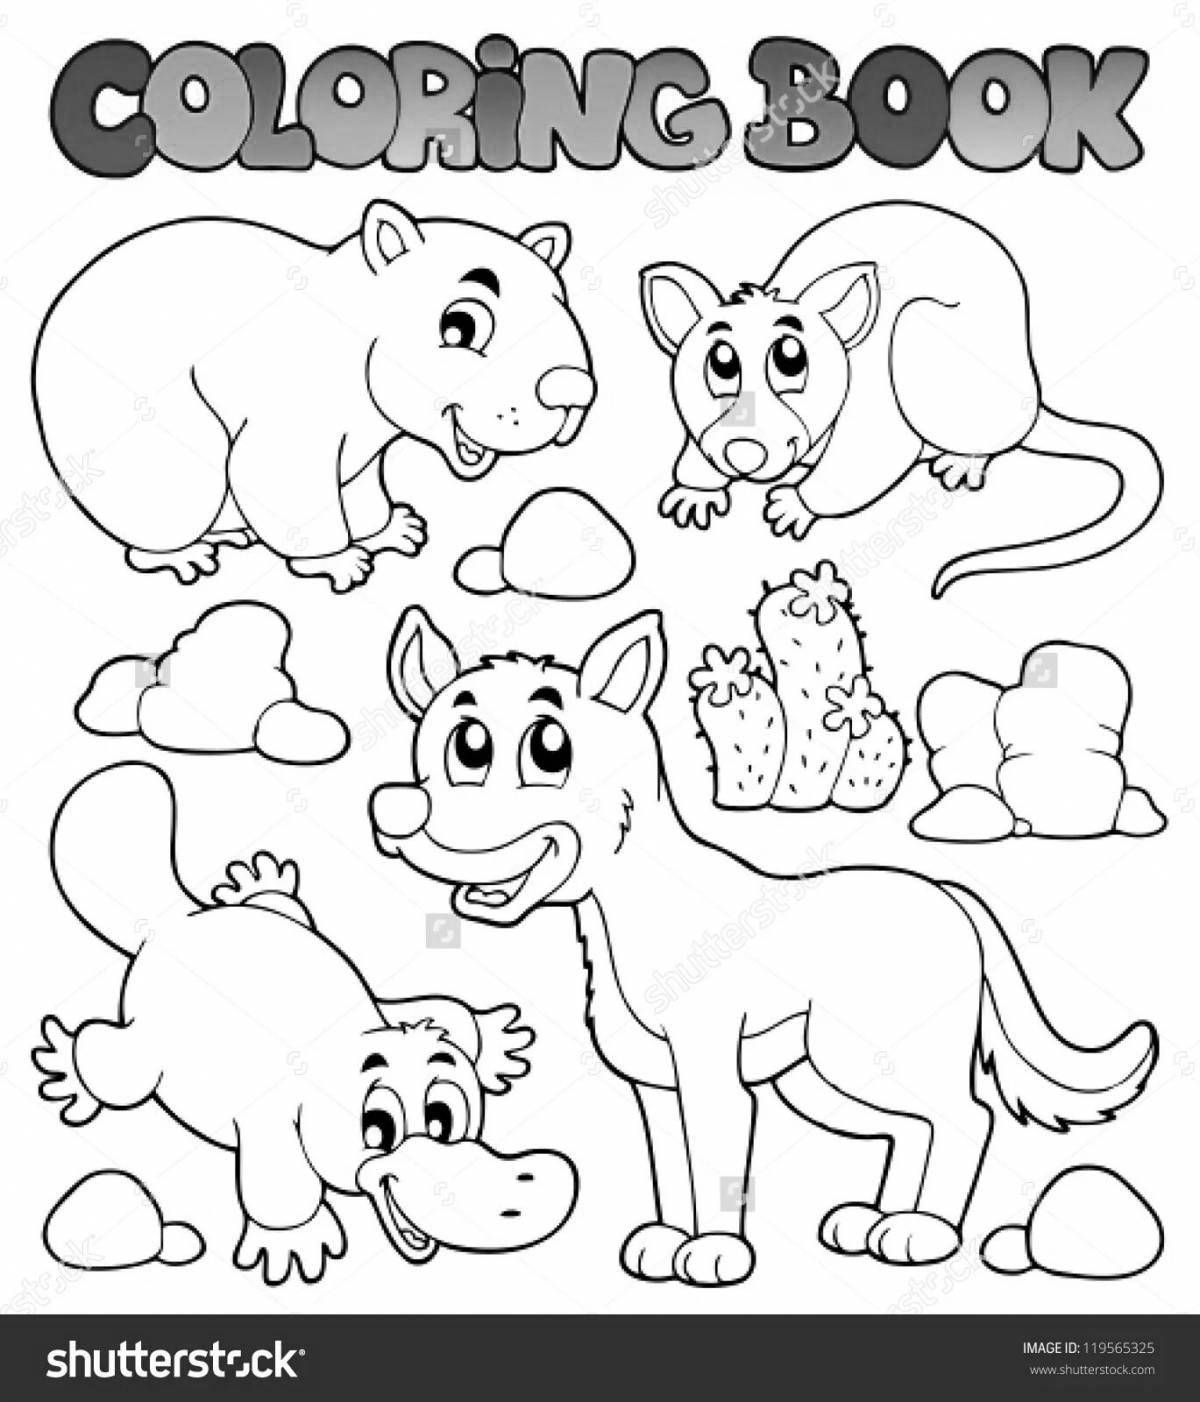 Crazy Australian Animals Coloring Pages for Preschoolers